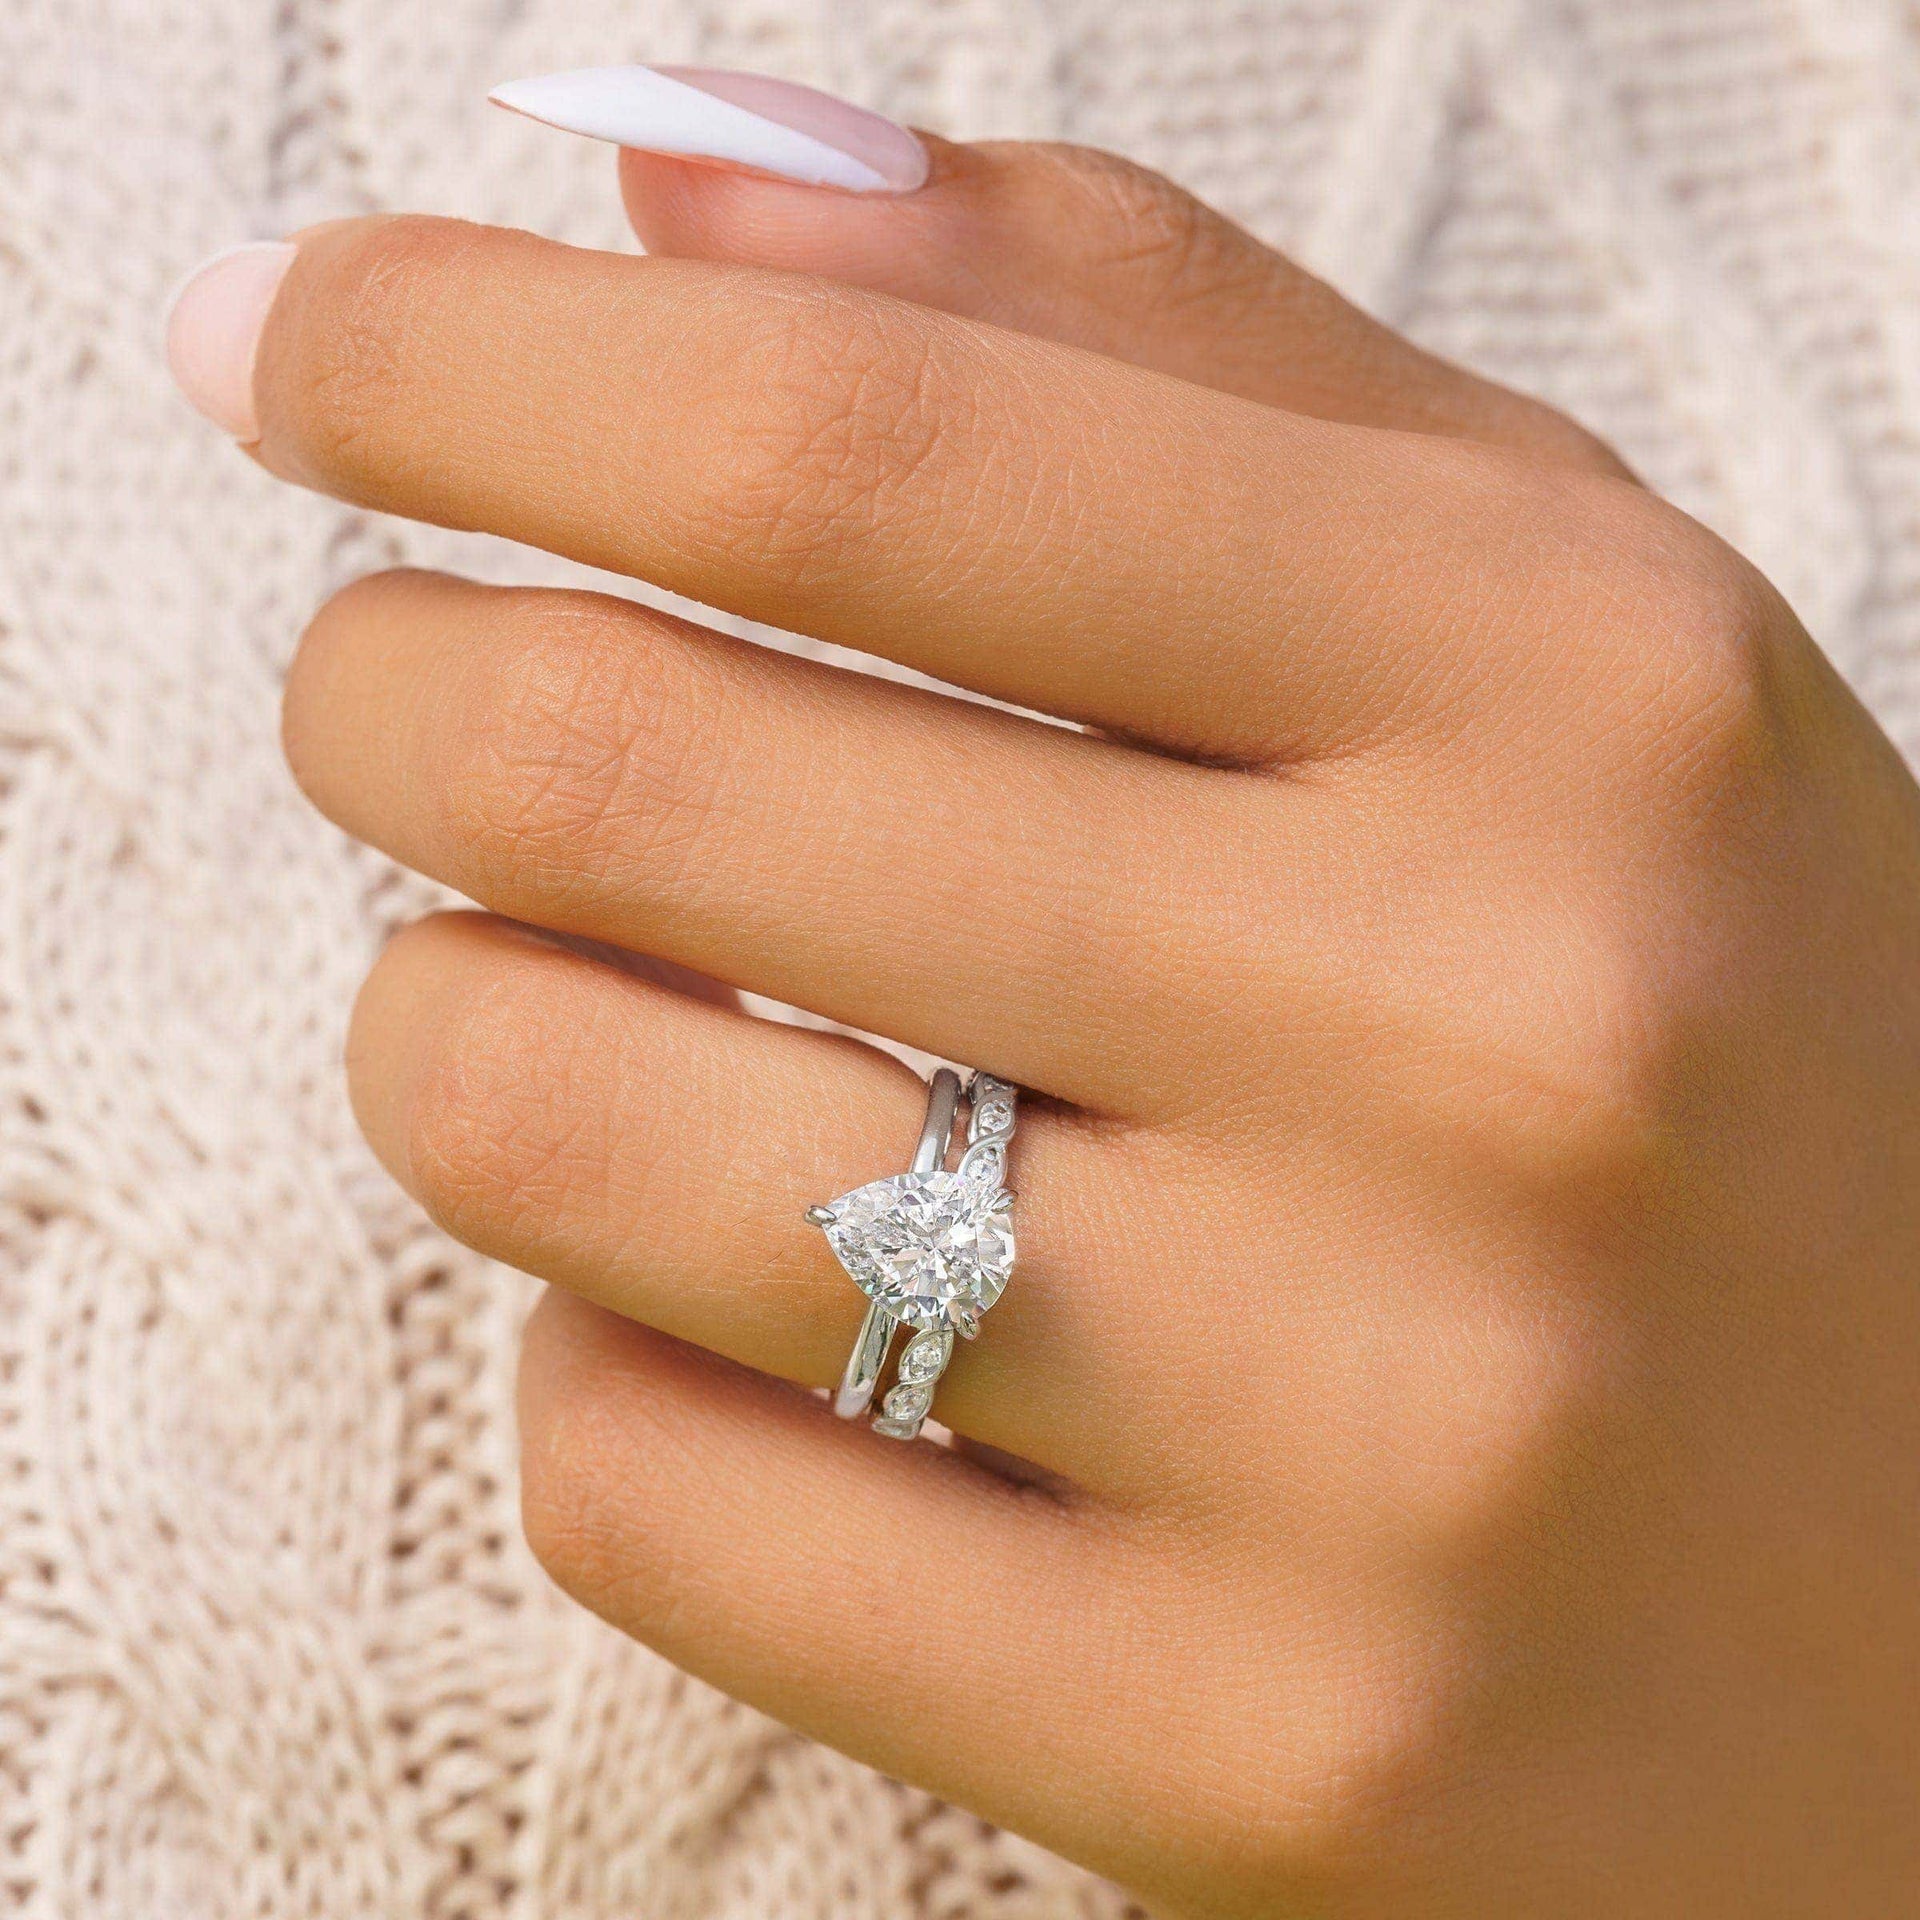 woman wearing pear shaped cut engagement ring with silver wedding band